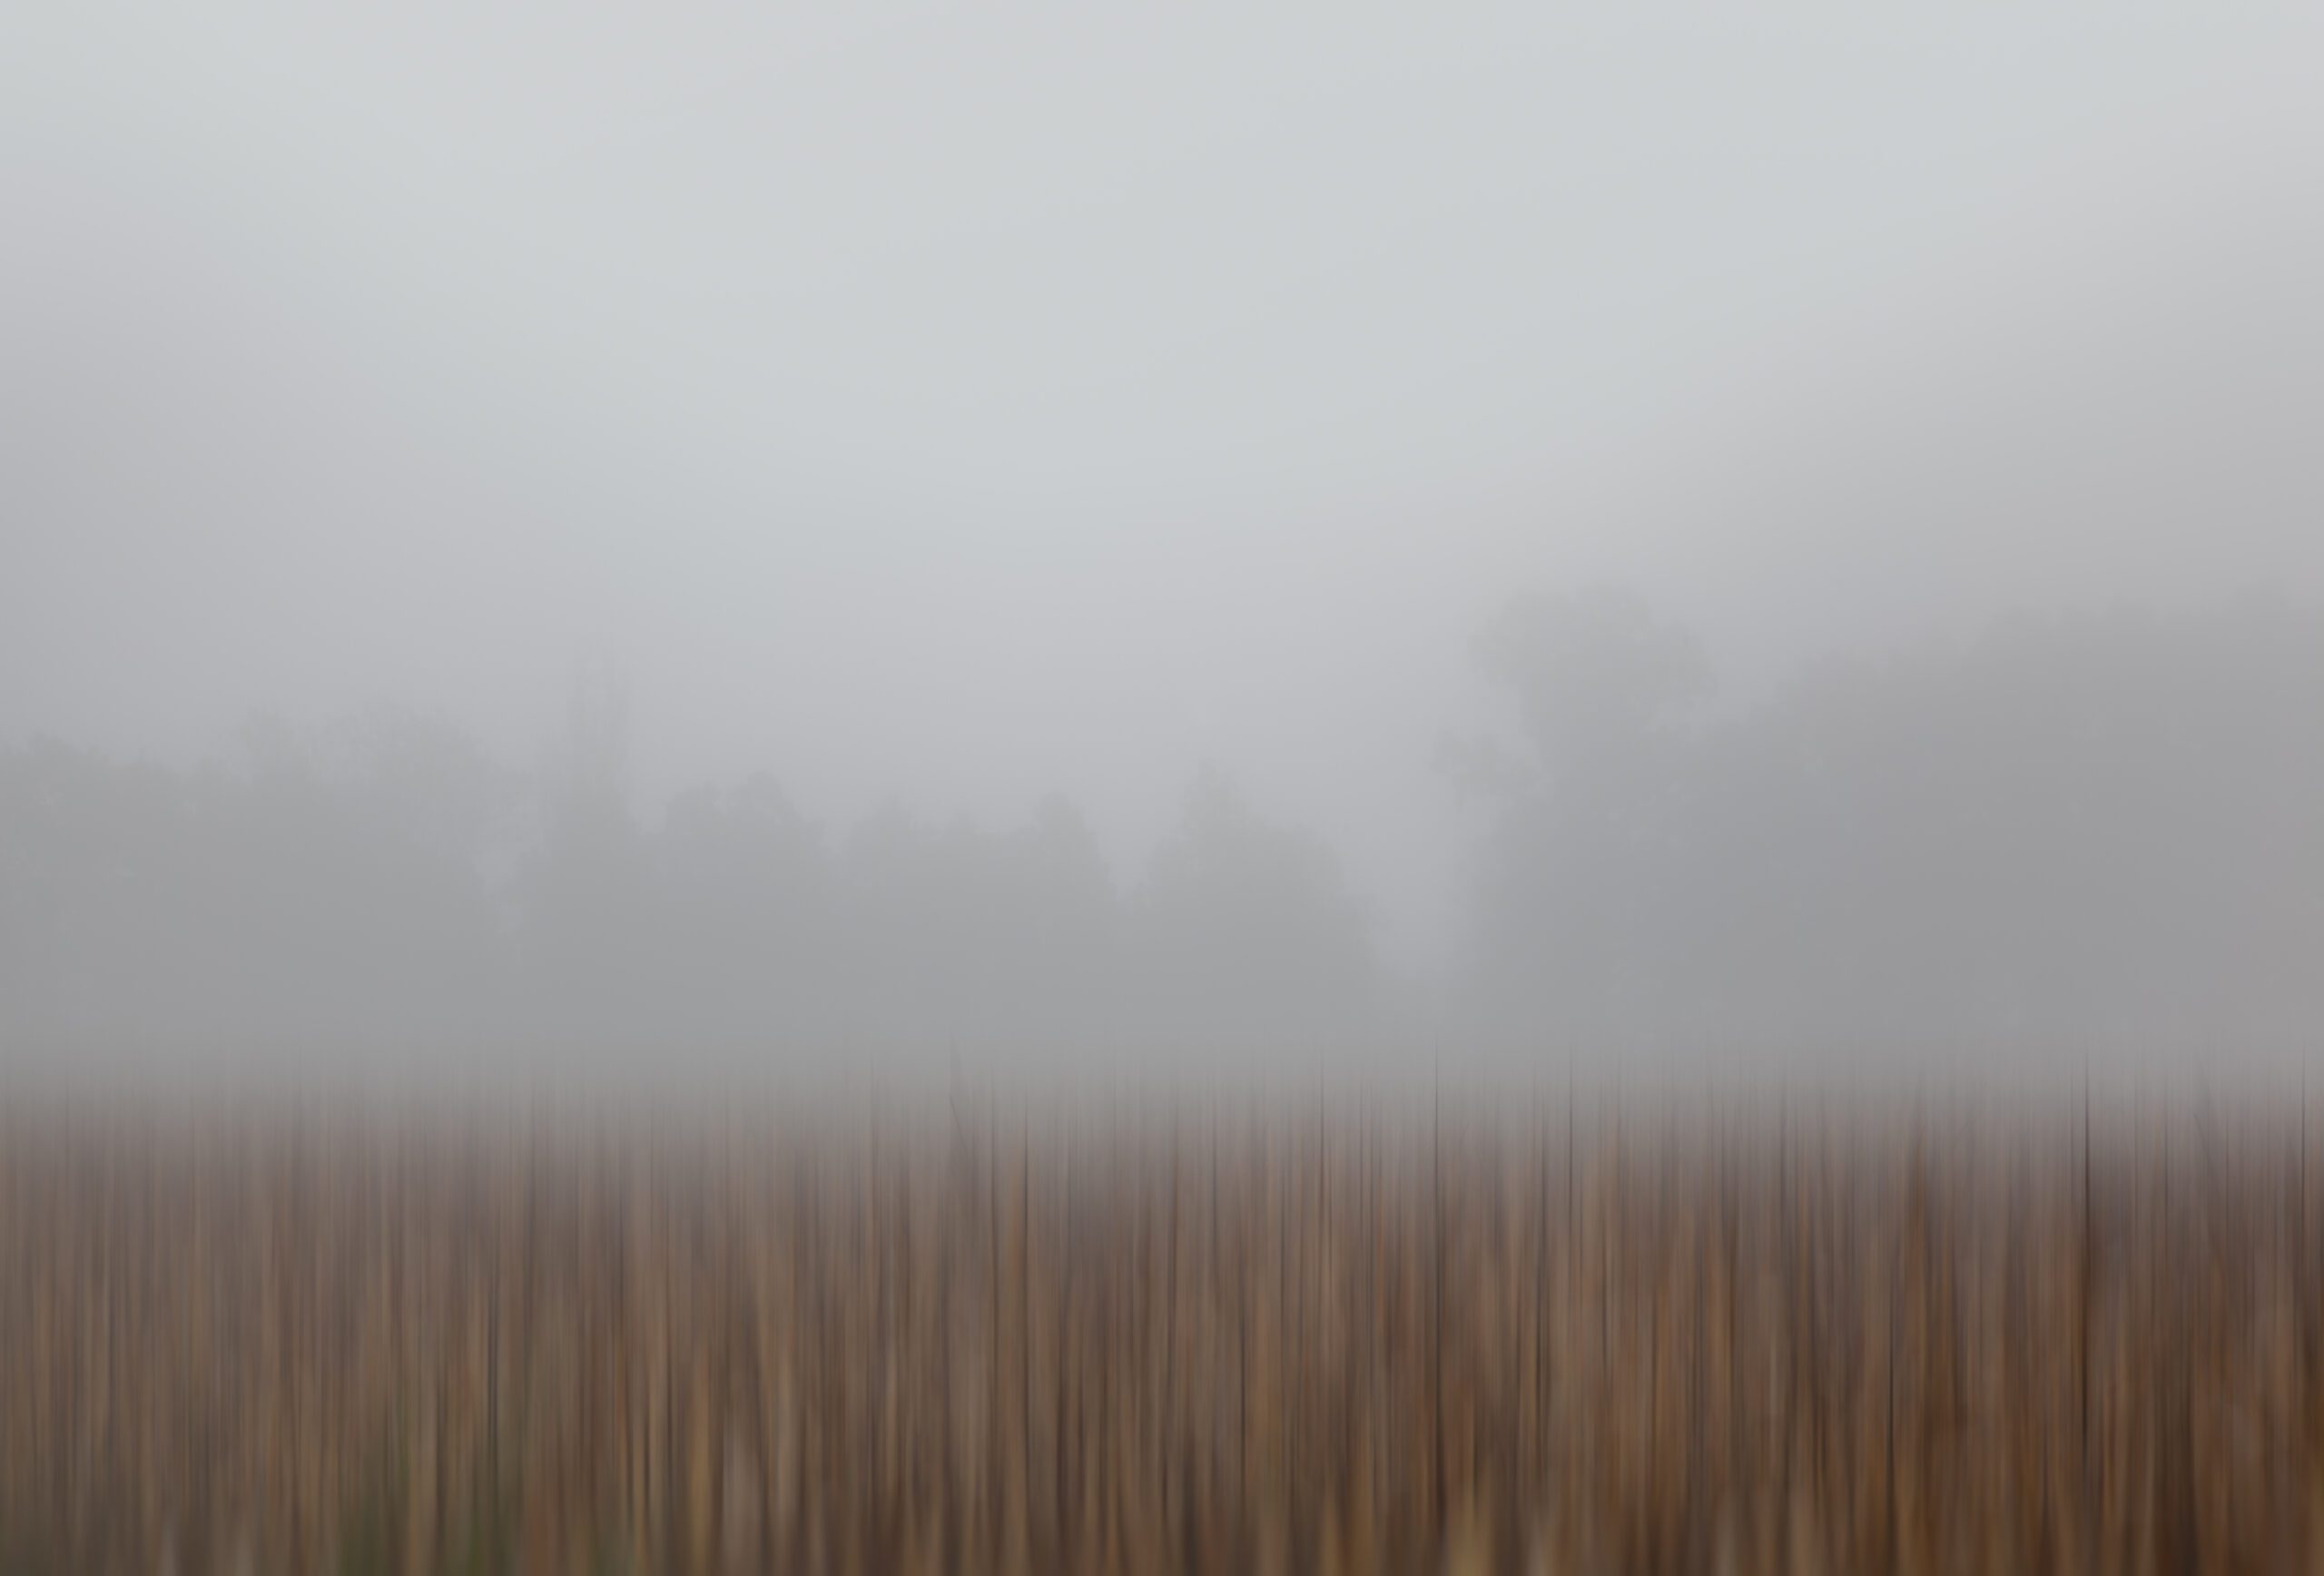 This piece reveals the serene beauty of a fog-enveloped harvest field in southern Czechia,